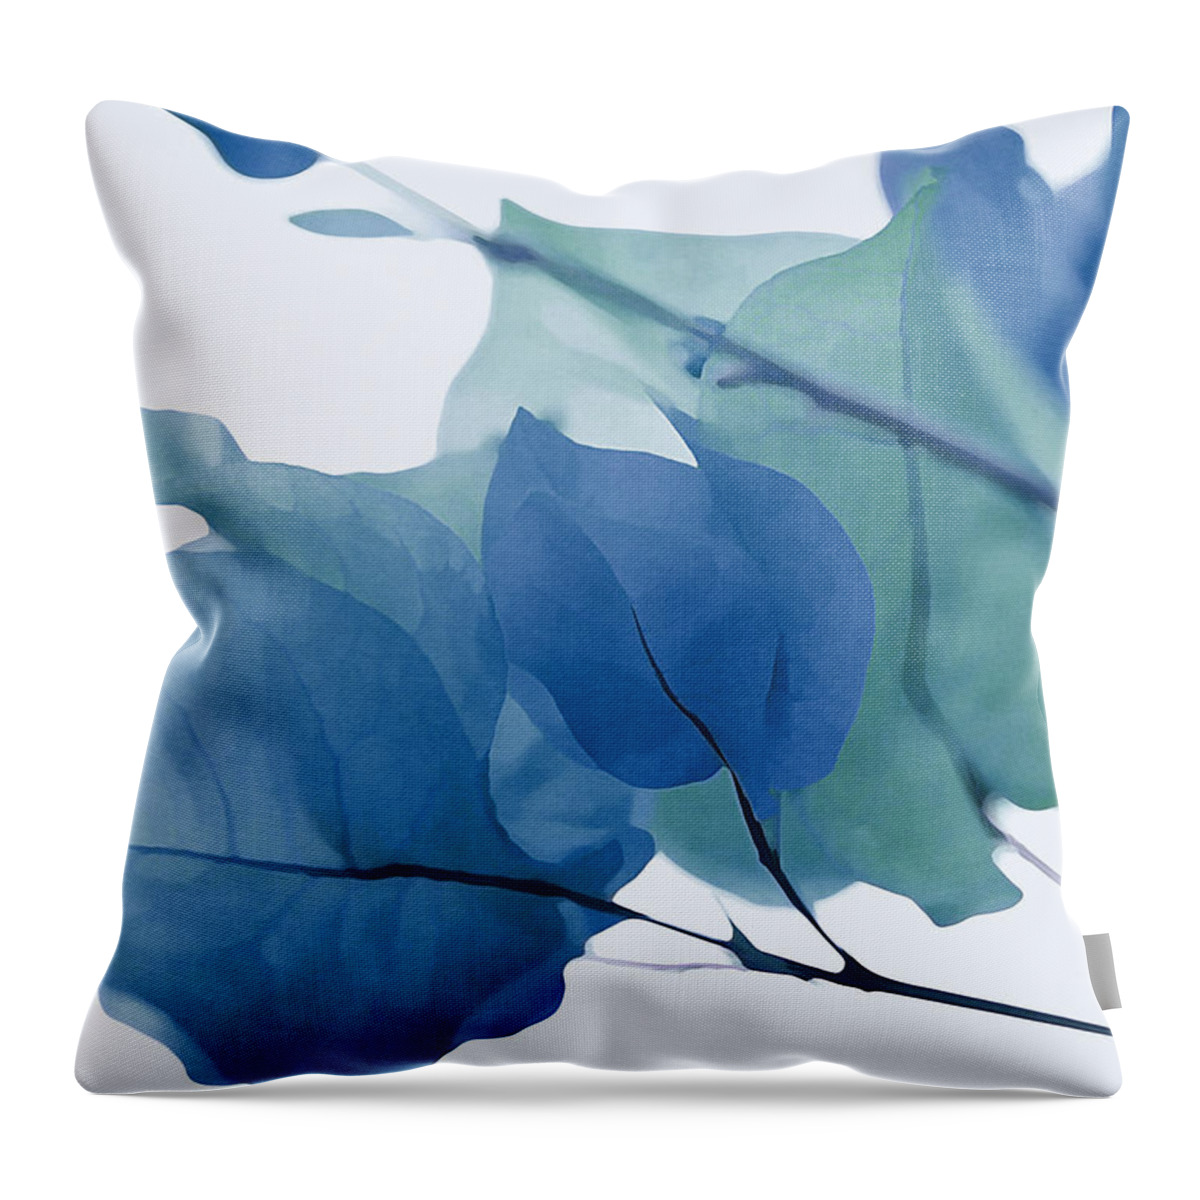 Bougainvillea Throw Pillow featuring the photograph Moody Blues Bougainvillea by Fraida Gutovich